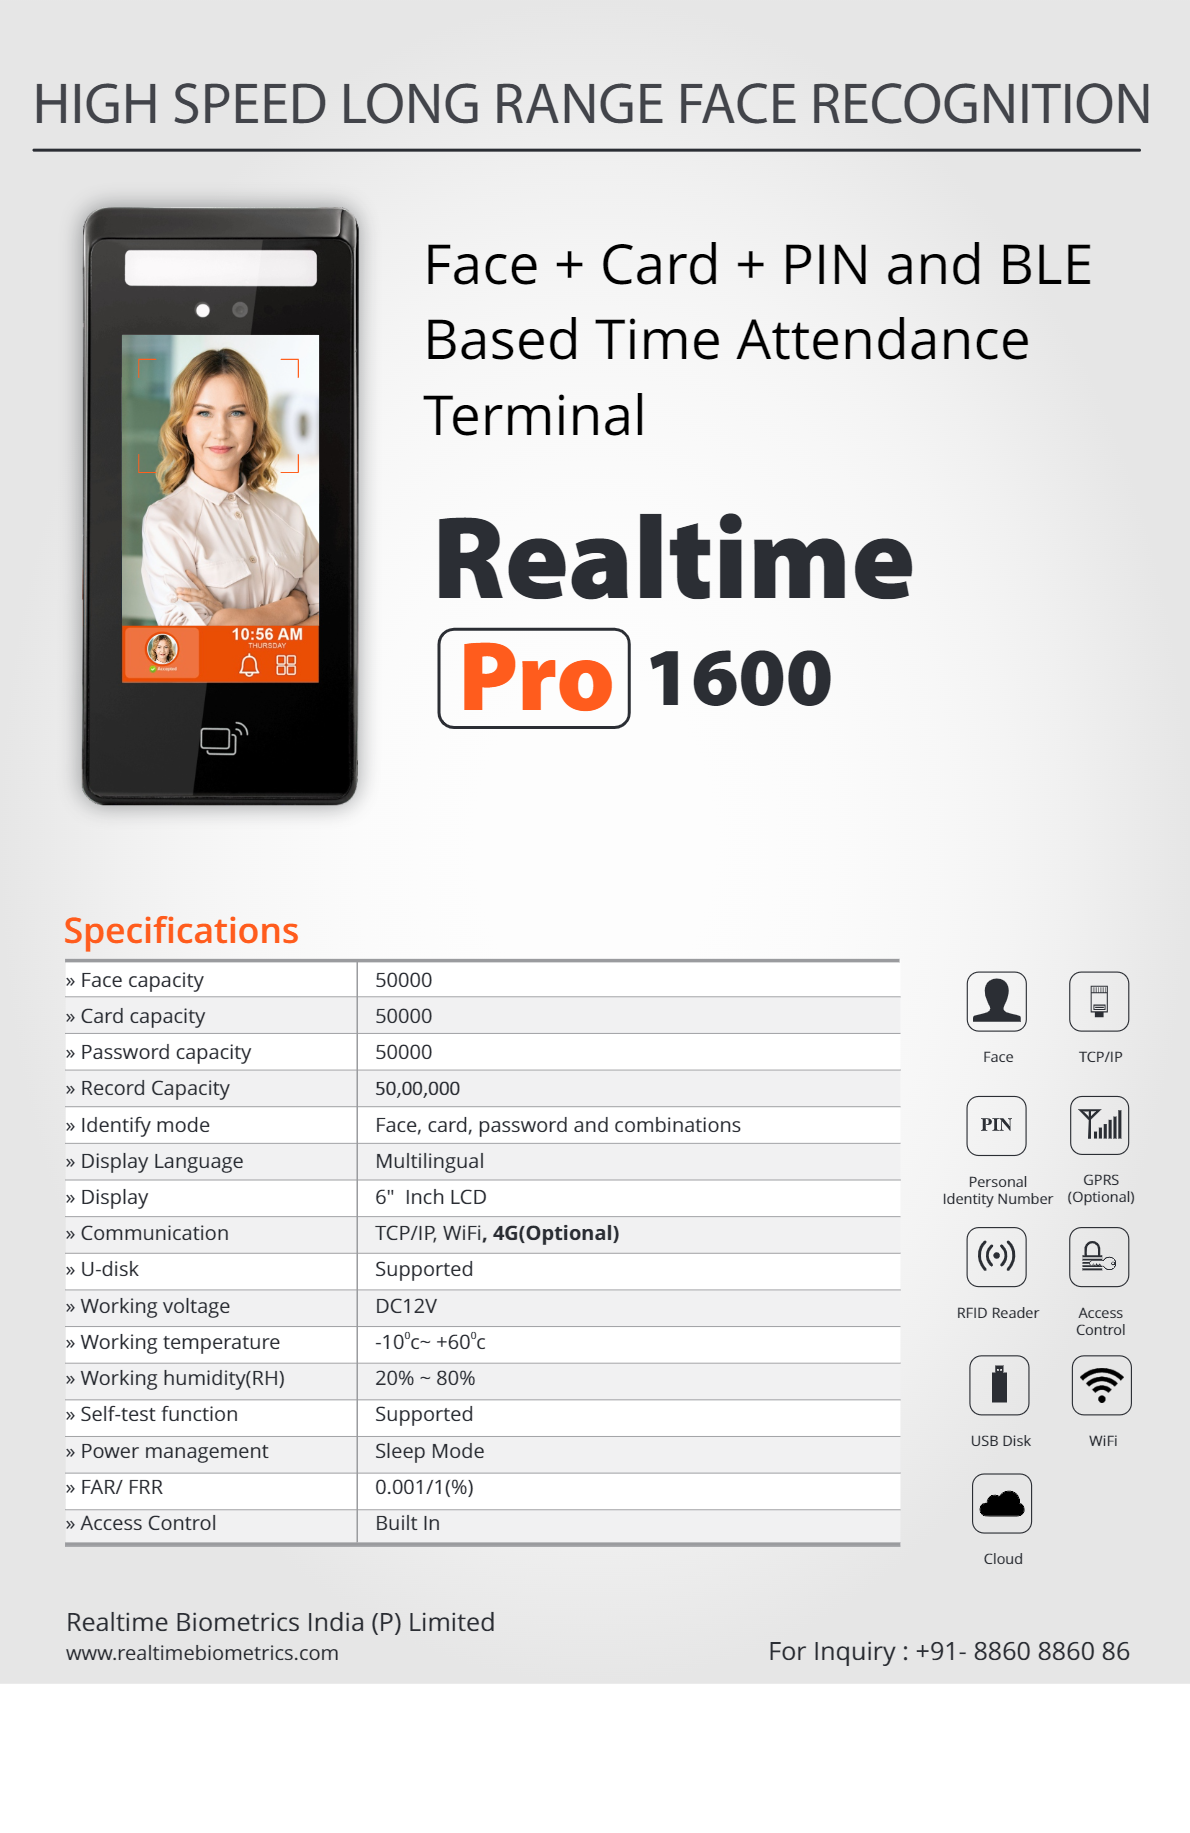 Realtime Pro 1600 Face + Card + PIN and BLE Based Time Attendance Terminal